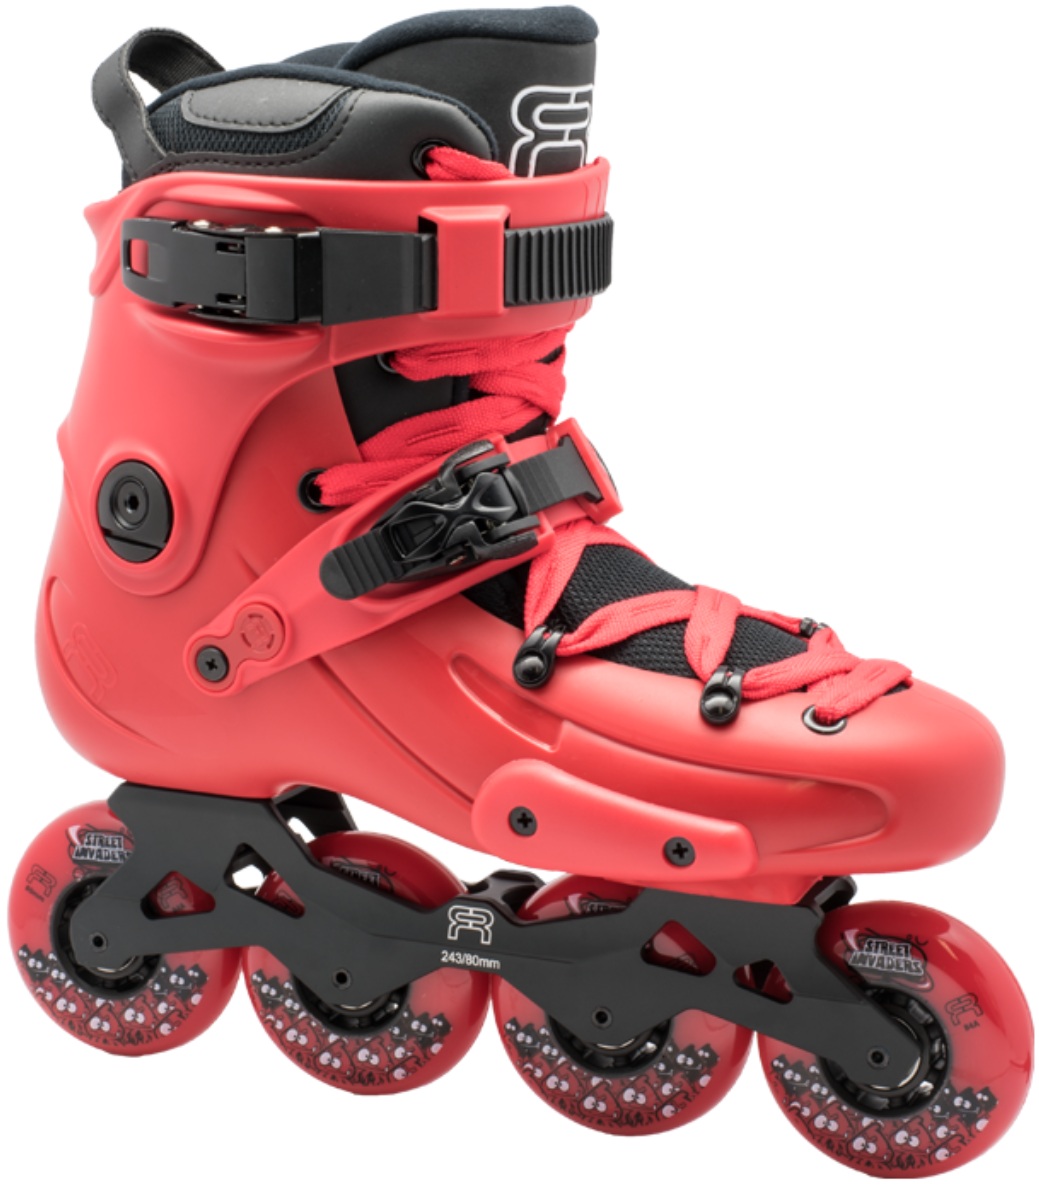 A red inline skate, named FR 1 80, with 4 wheels of 80 mm